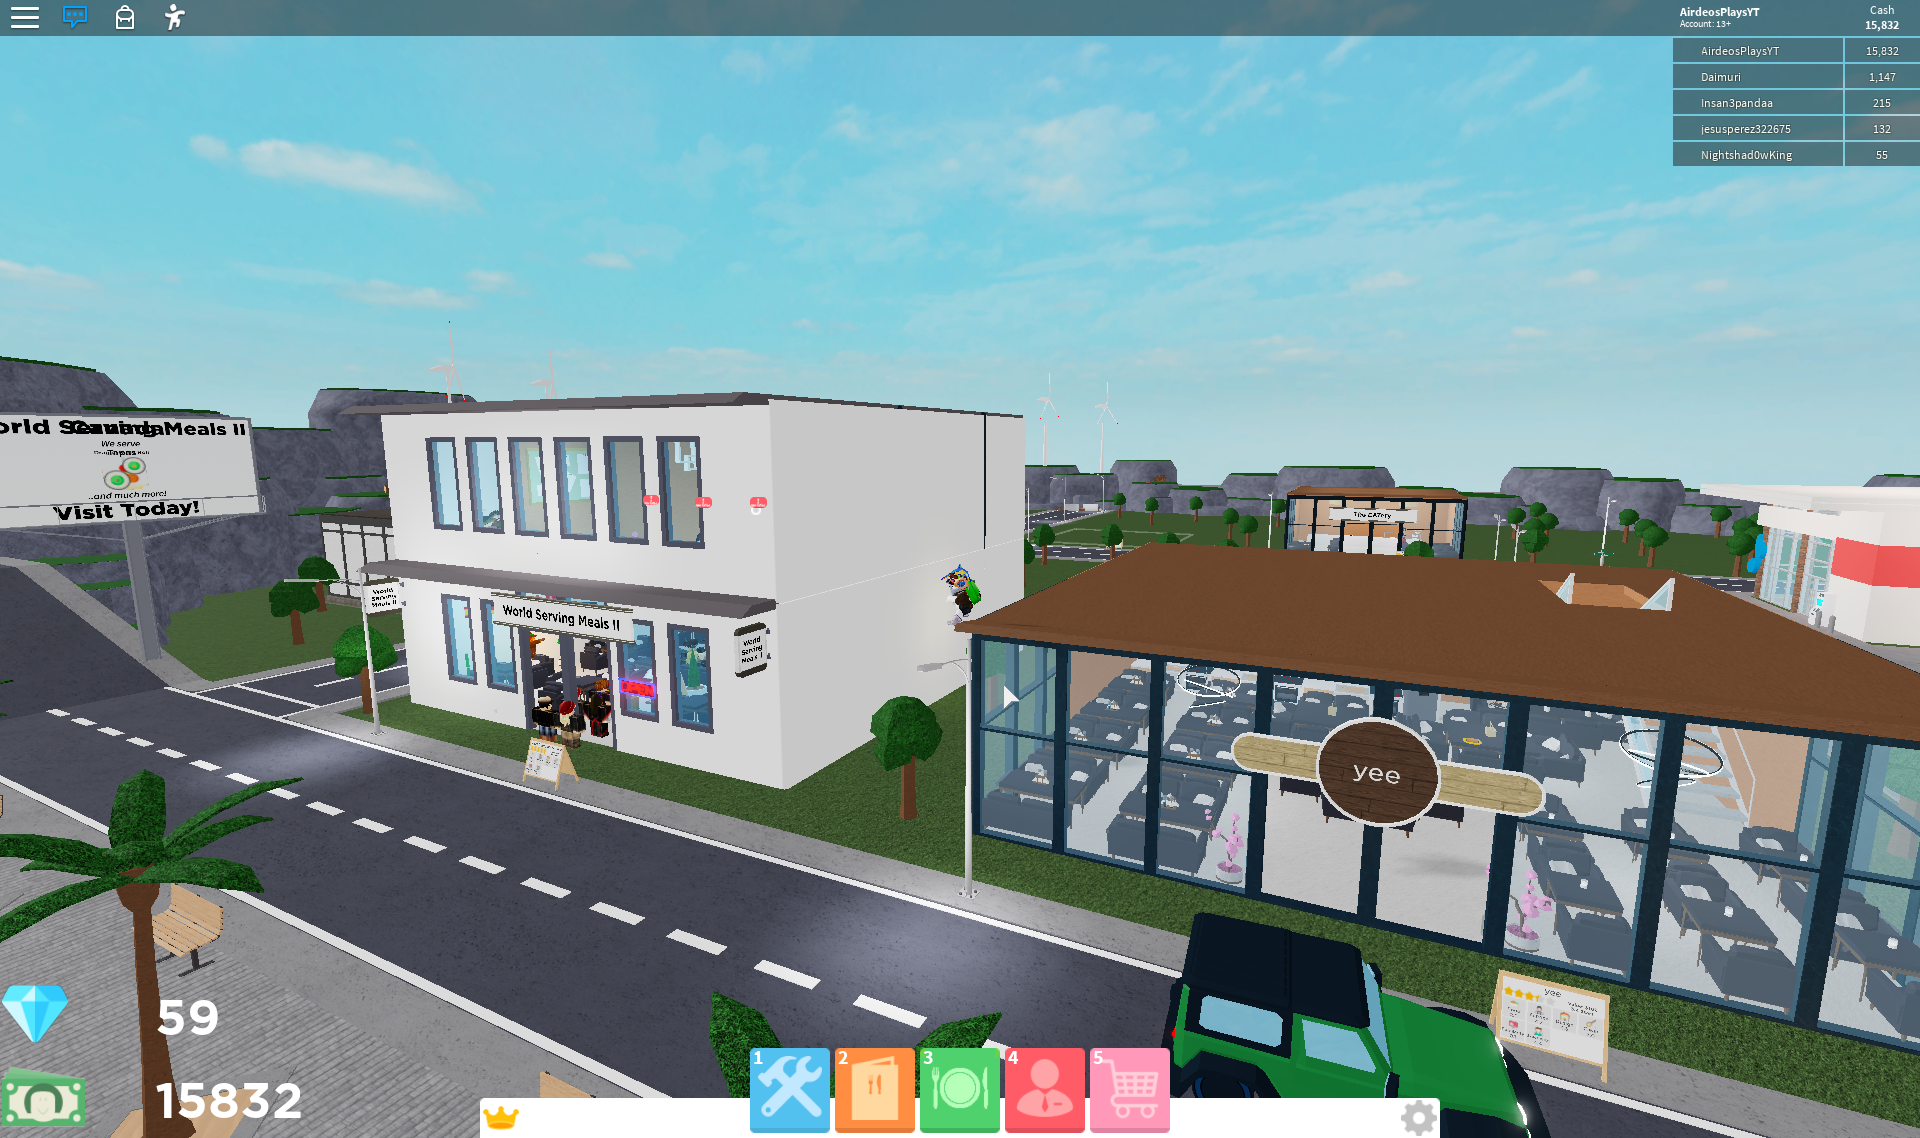 Upgrading Our Restaurant Again Roblox Restaurant Tycoon Roblox Games Downloads Free - roblox designing template 585 by 559 how to get 60000 robux